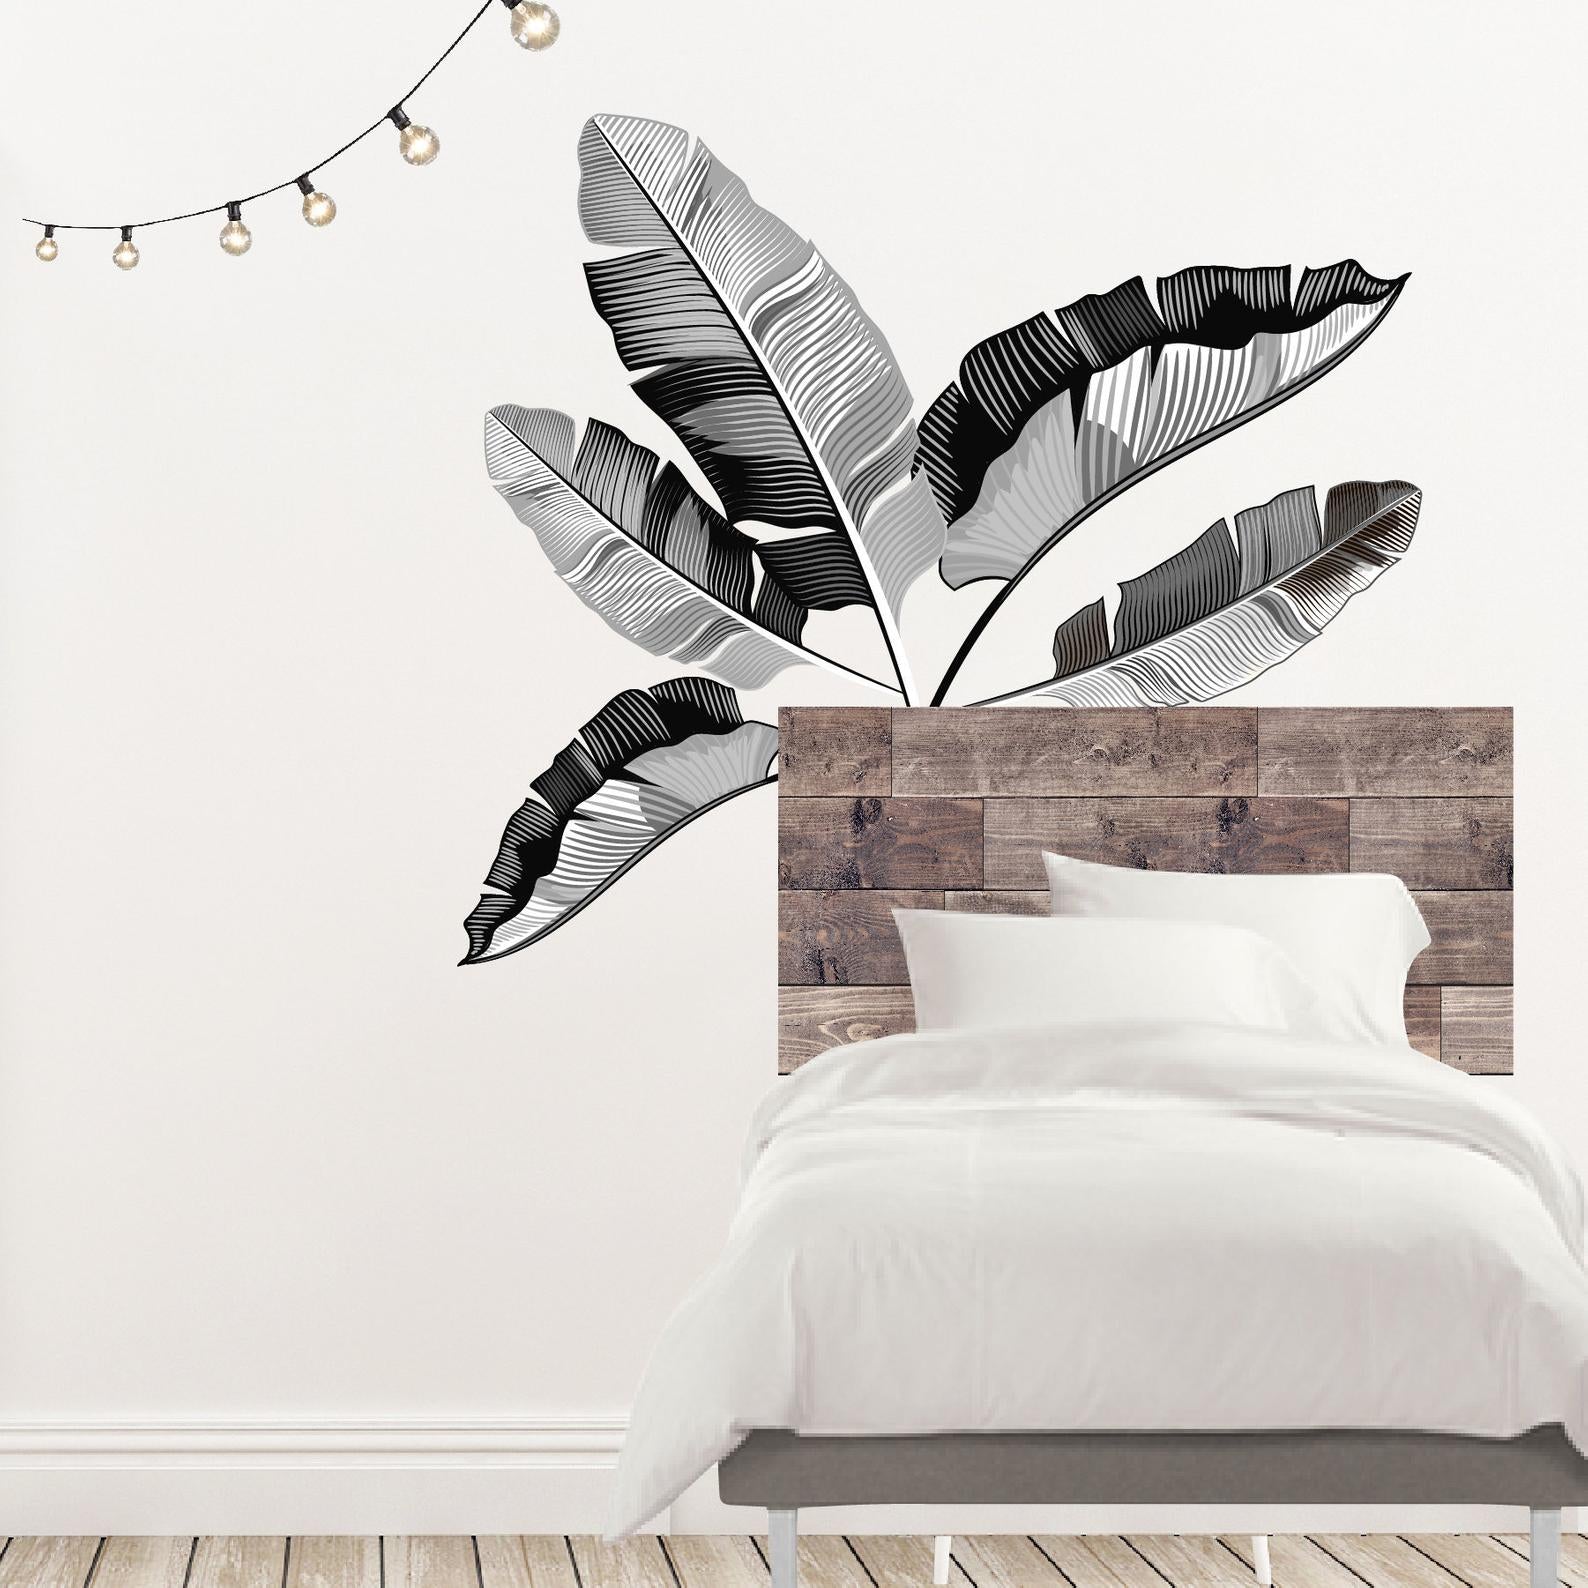 Black and White Banana Leaves Peel and Stick Wall Decals - Picture Perfect Decals